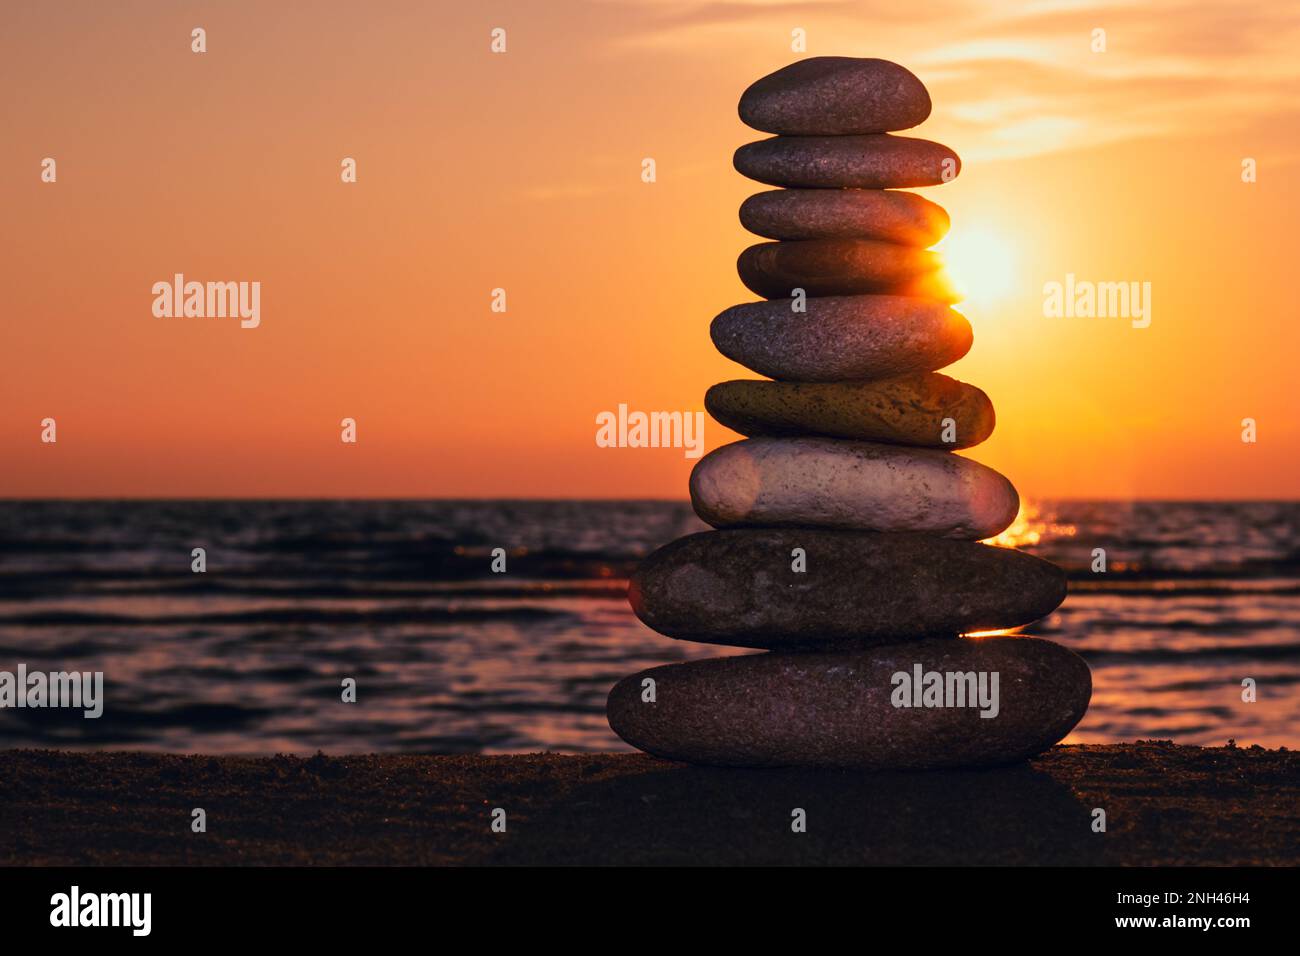 Stacked rocks on the beach with a sunset ocean in the background, Zen Sunset Wallpapers, Pyramid of pebbles on the beach at sunset. Stock Photo